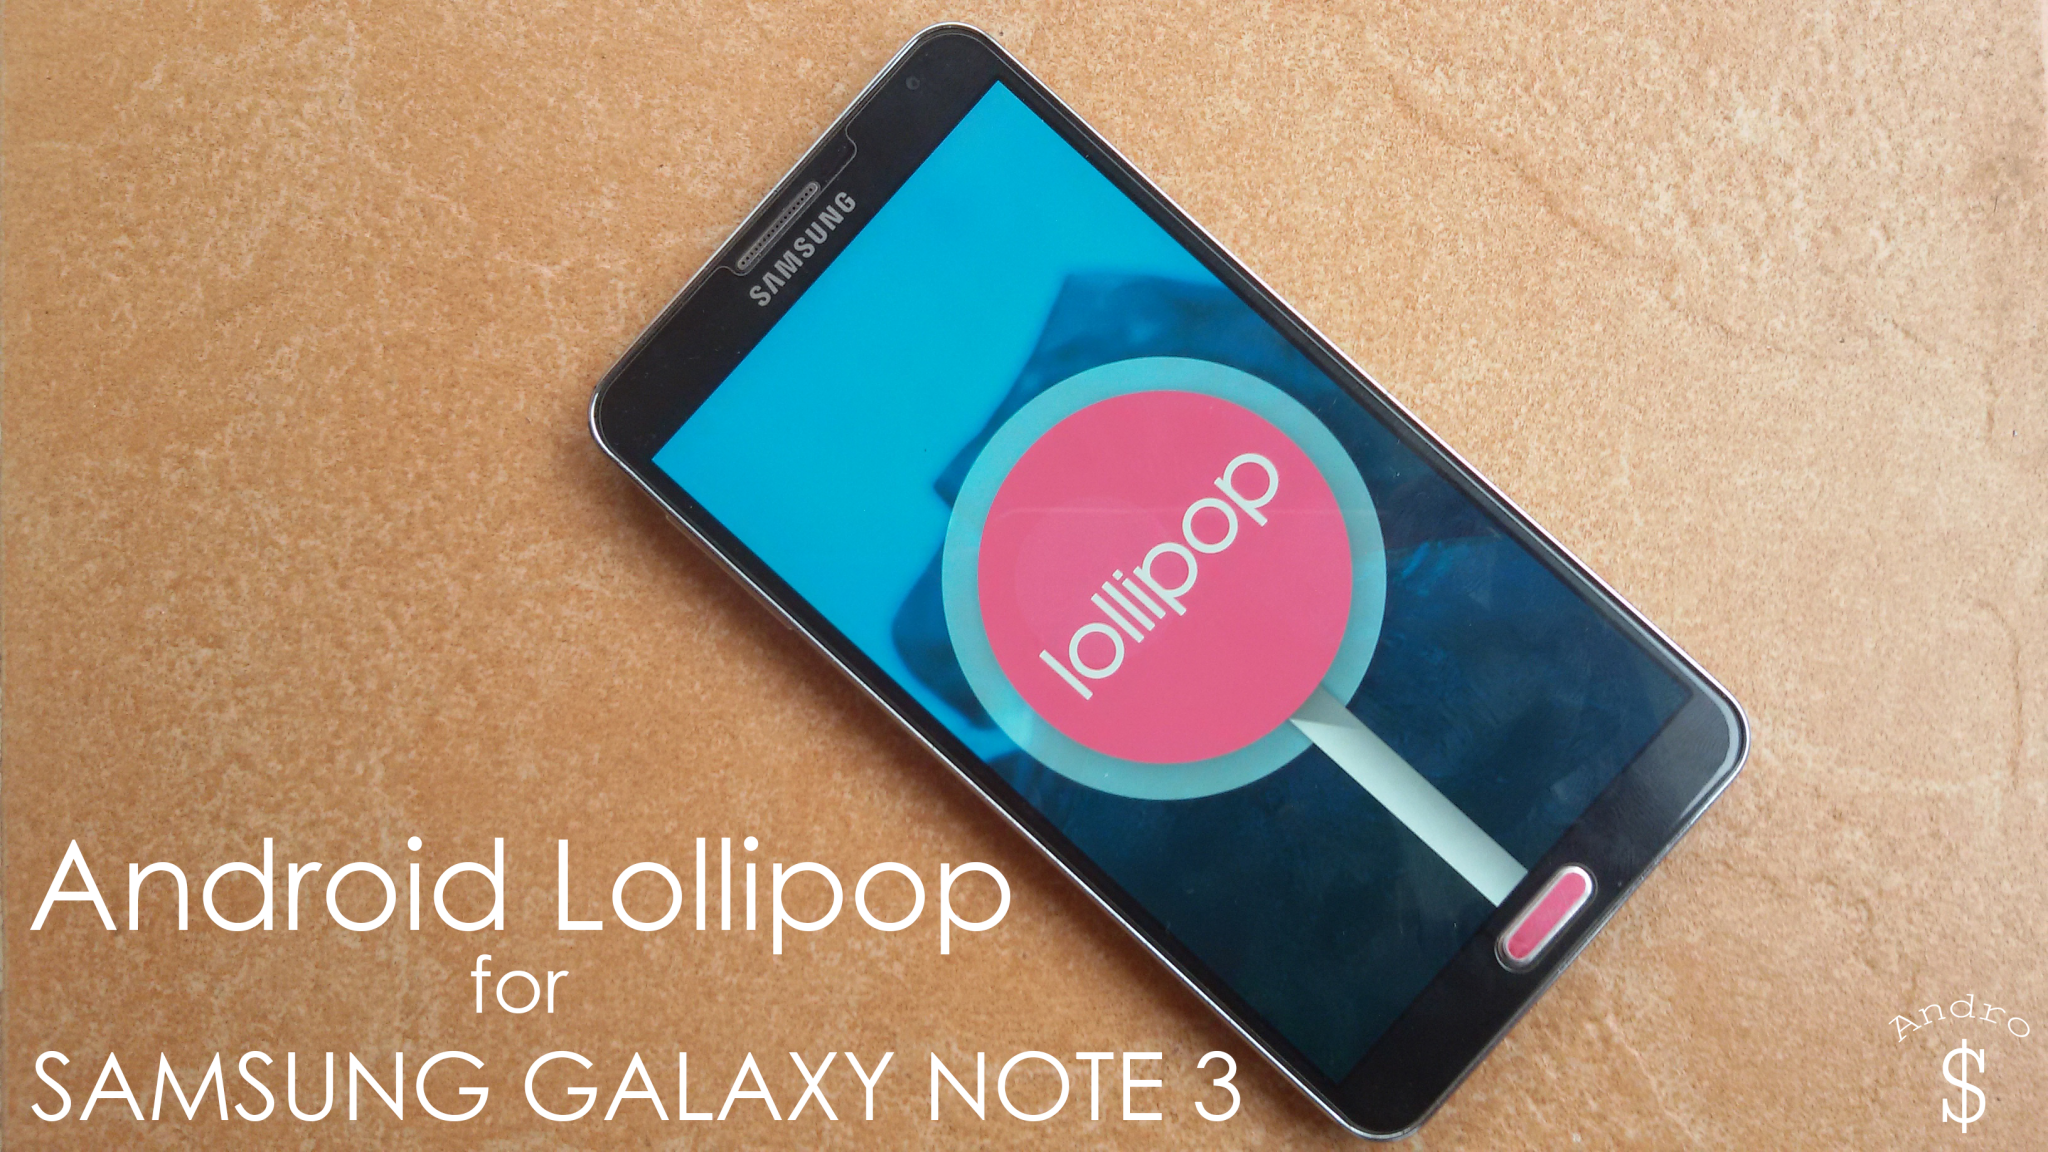 Android Lollipop for the Galaxy Note 3